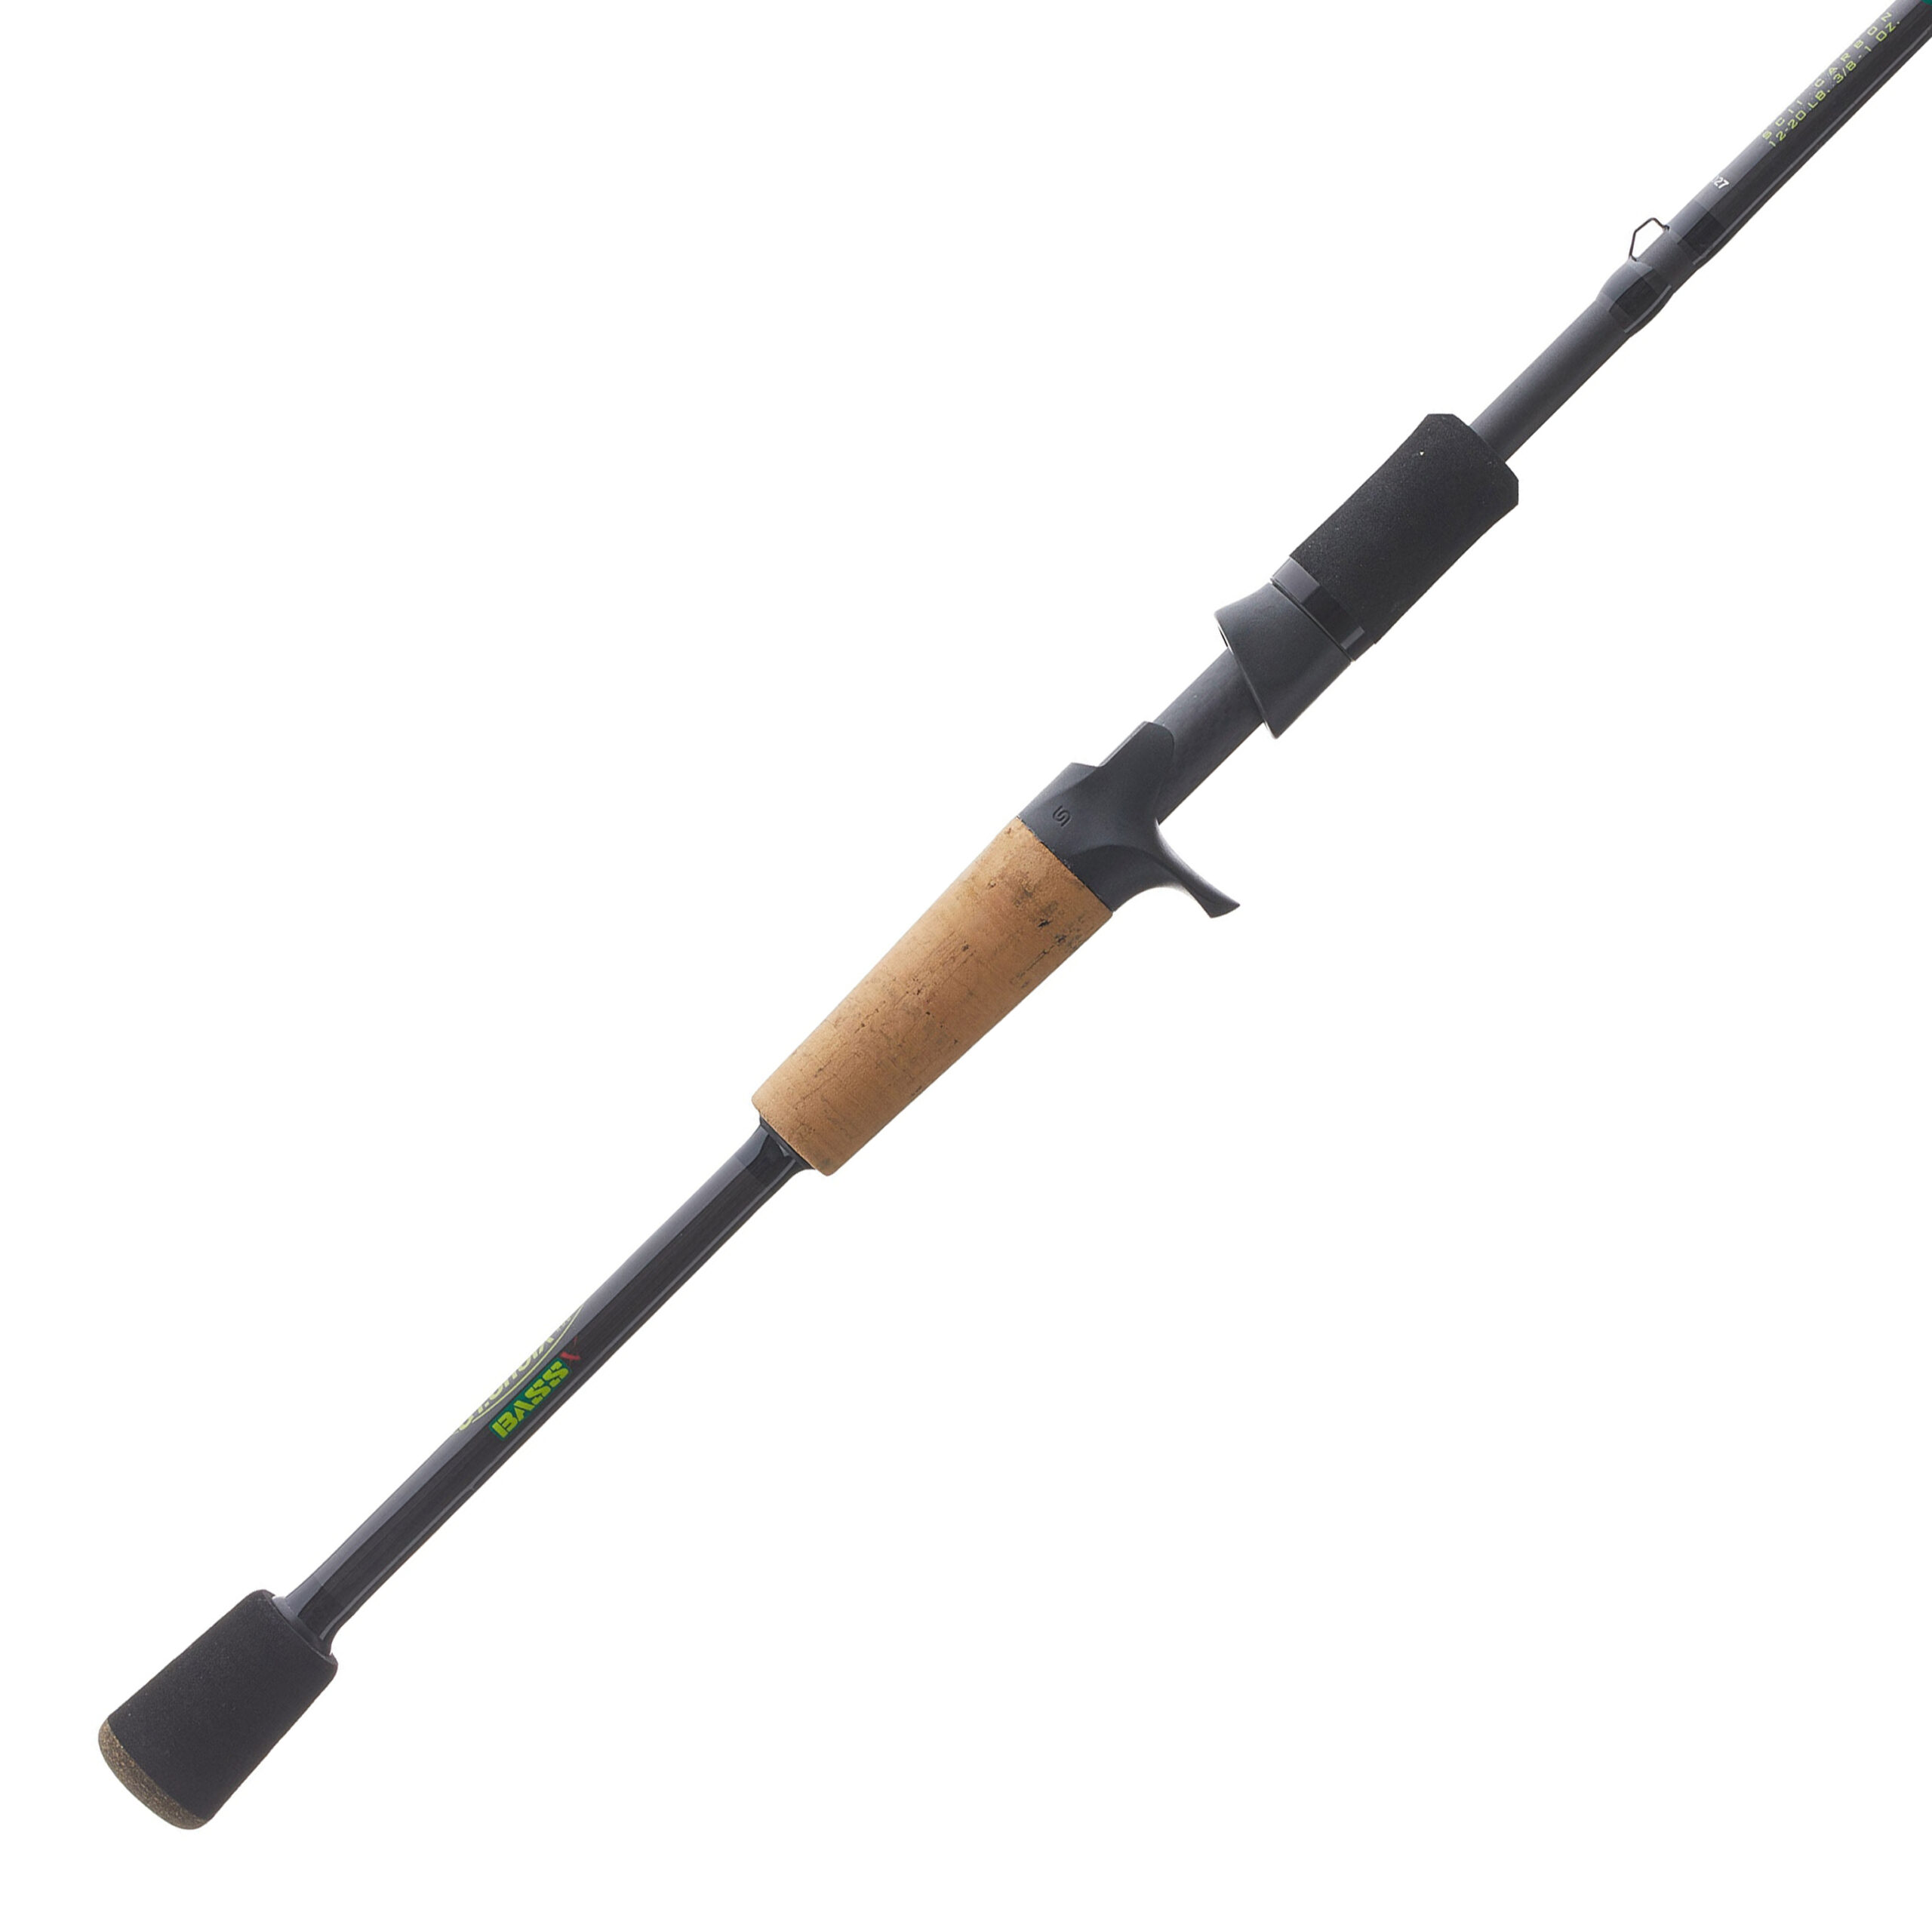 St Croix Bass Fishing Casting Rods for Sale in Miamisburg, OH - OfferUp